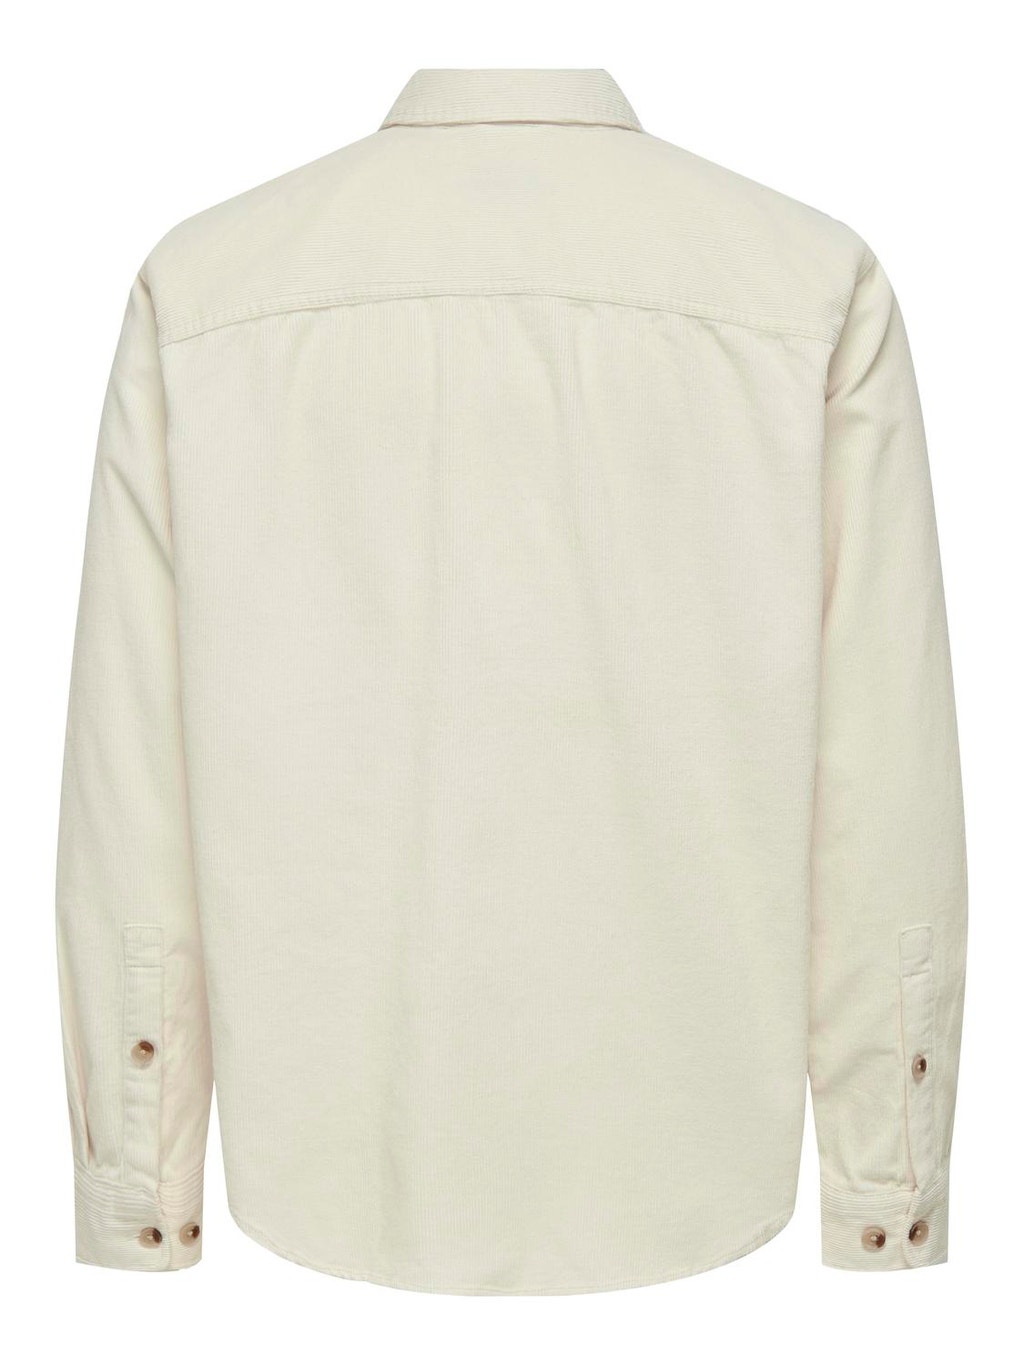 Relaxed Fit Corduroy shirt | White | ONLY & SONS®